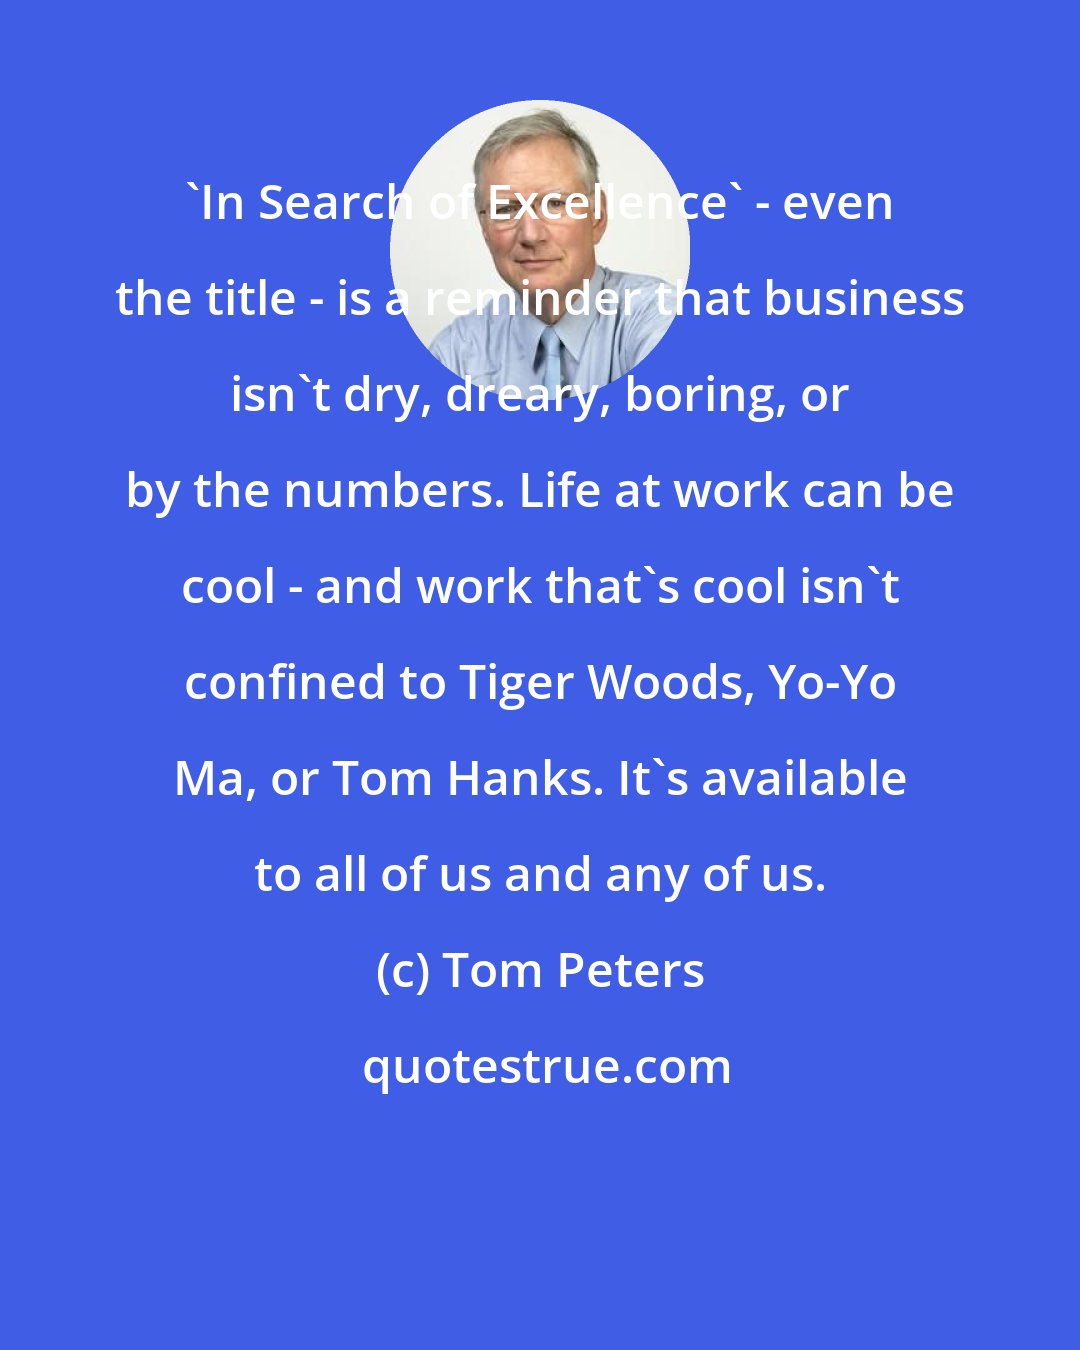 Tom Peters: 'In Search of Excellence' - even the title - is a reminder that business isn't dry, dreary, boring, or by the numbers. Life at work can be cool - and work that's cool isn't confined to Tiger Woods, Yo-Yo Ma, or Tom Hanks. It's available to all of us and any of us.